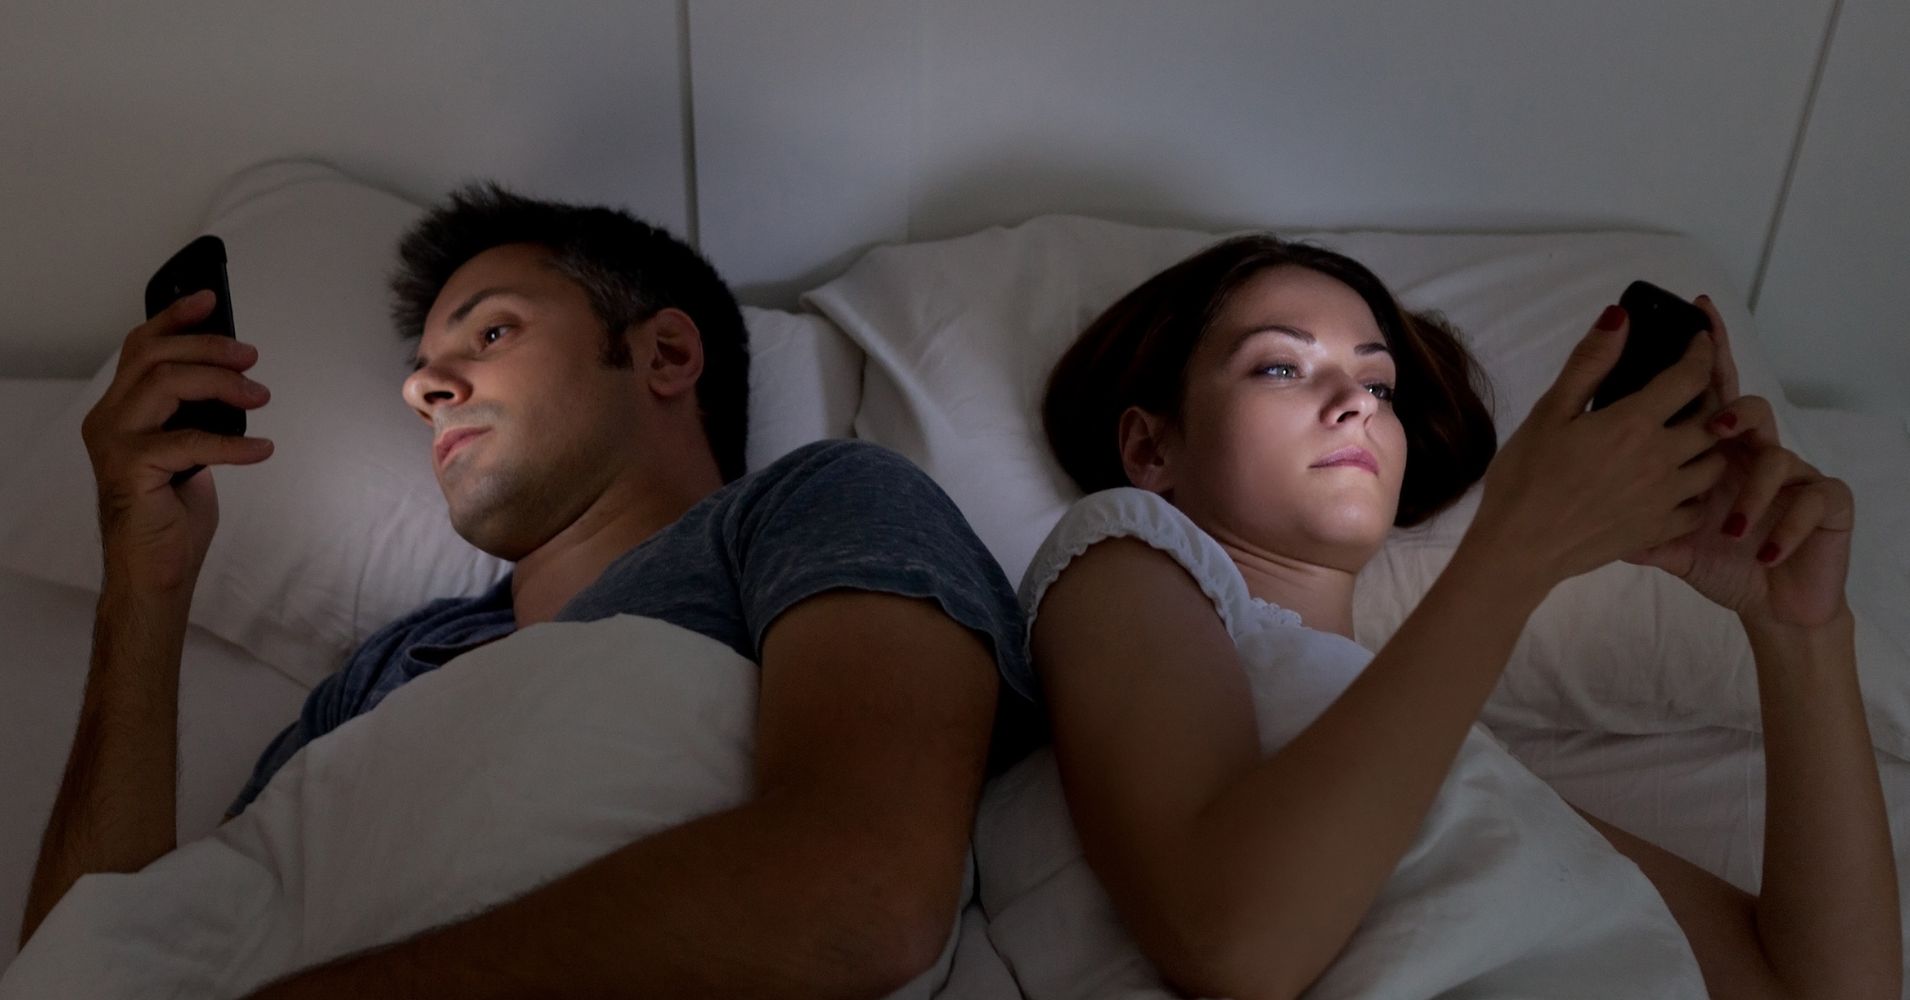 11 Activities To Do Before Bed That Aren't Checking Your Phone